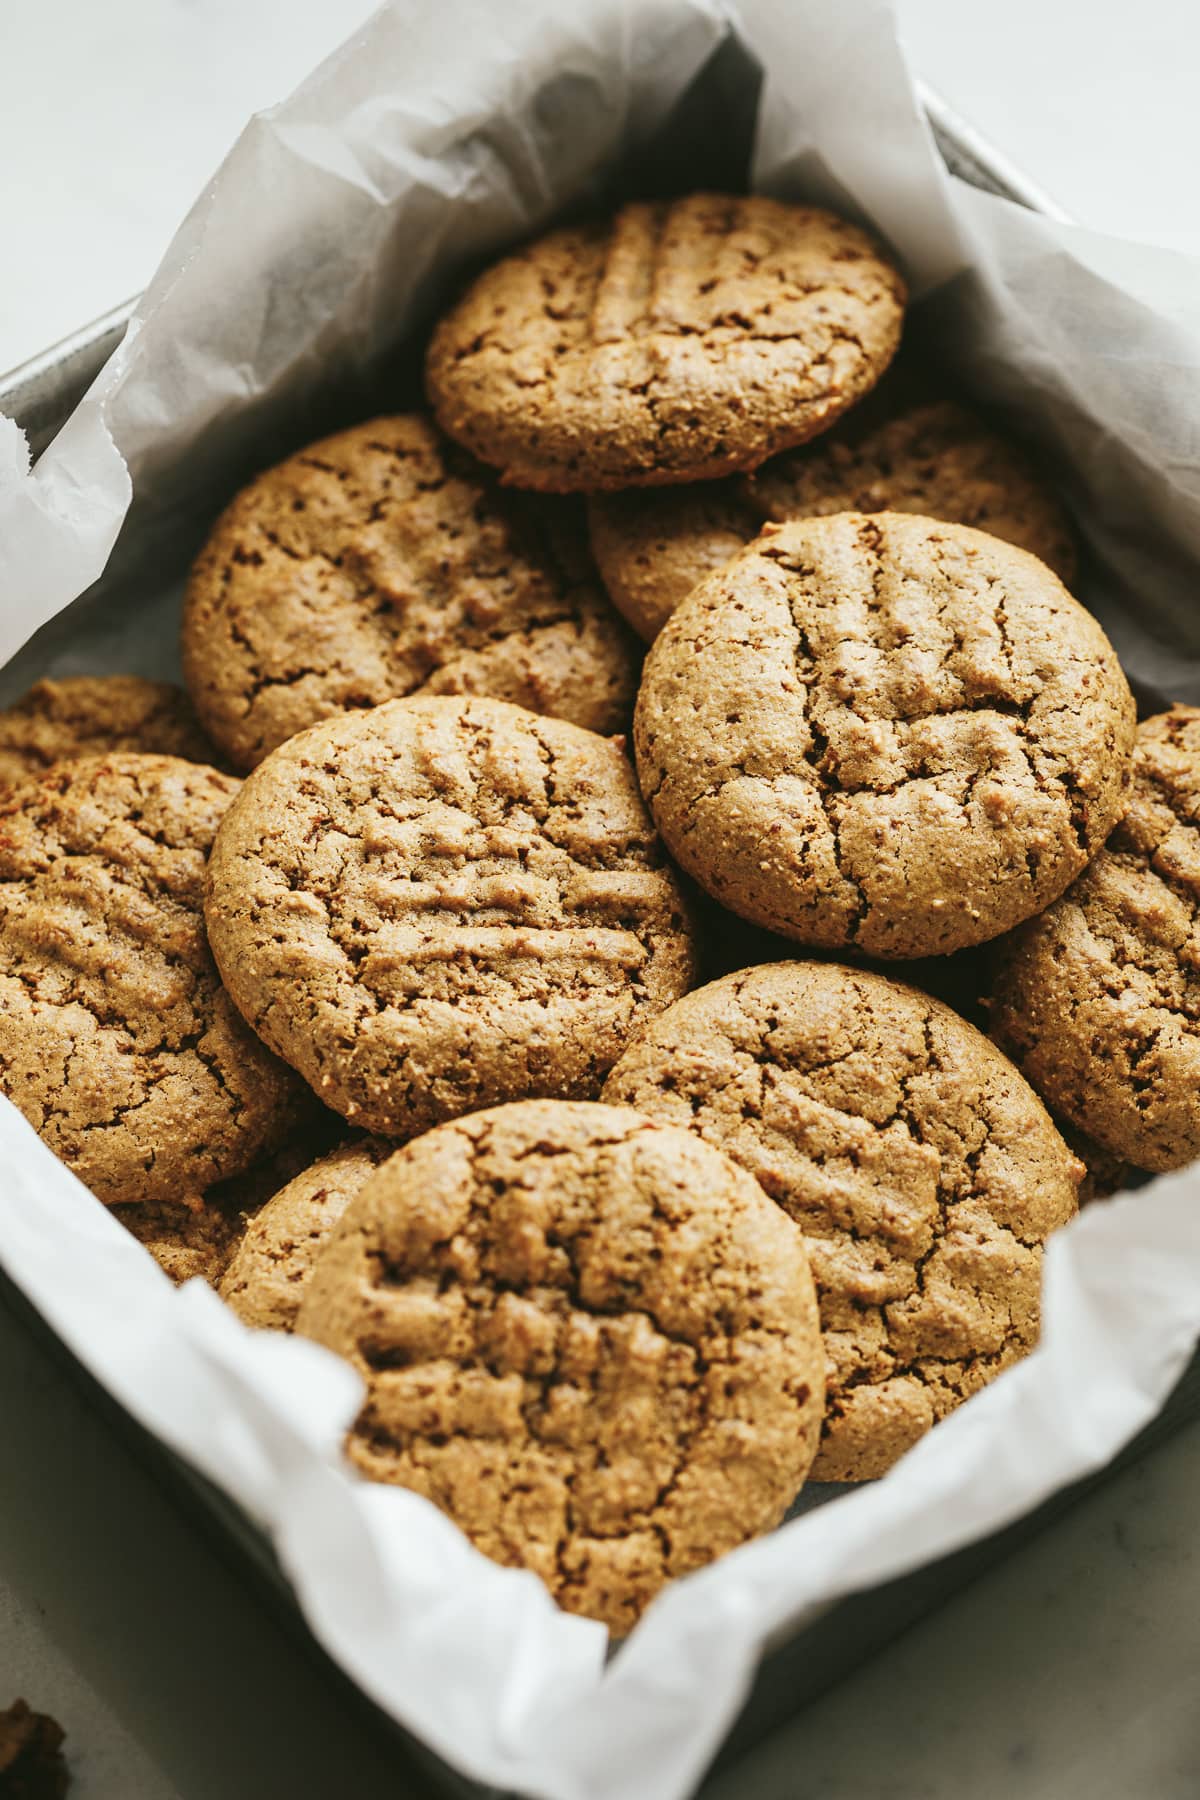 Almond flour peanut butter cookies in a dish.